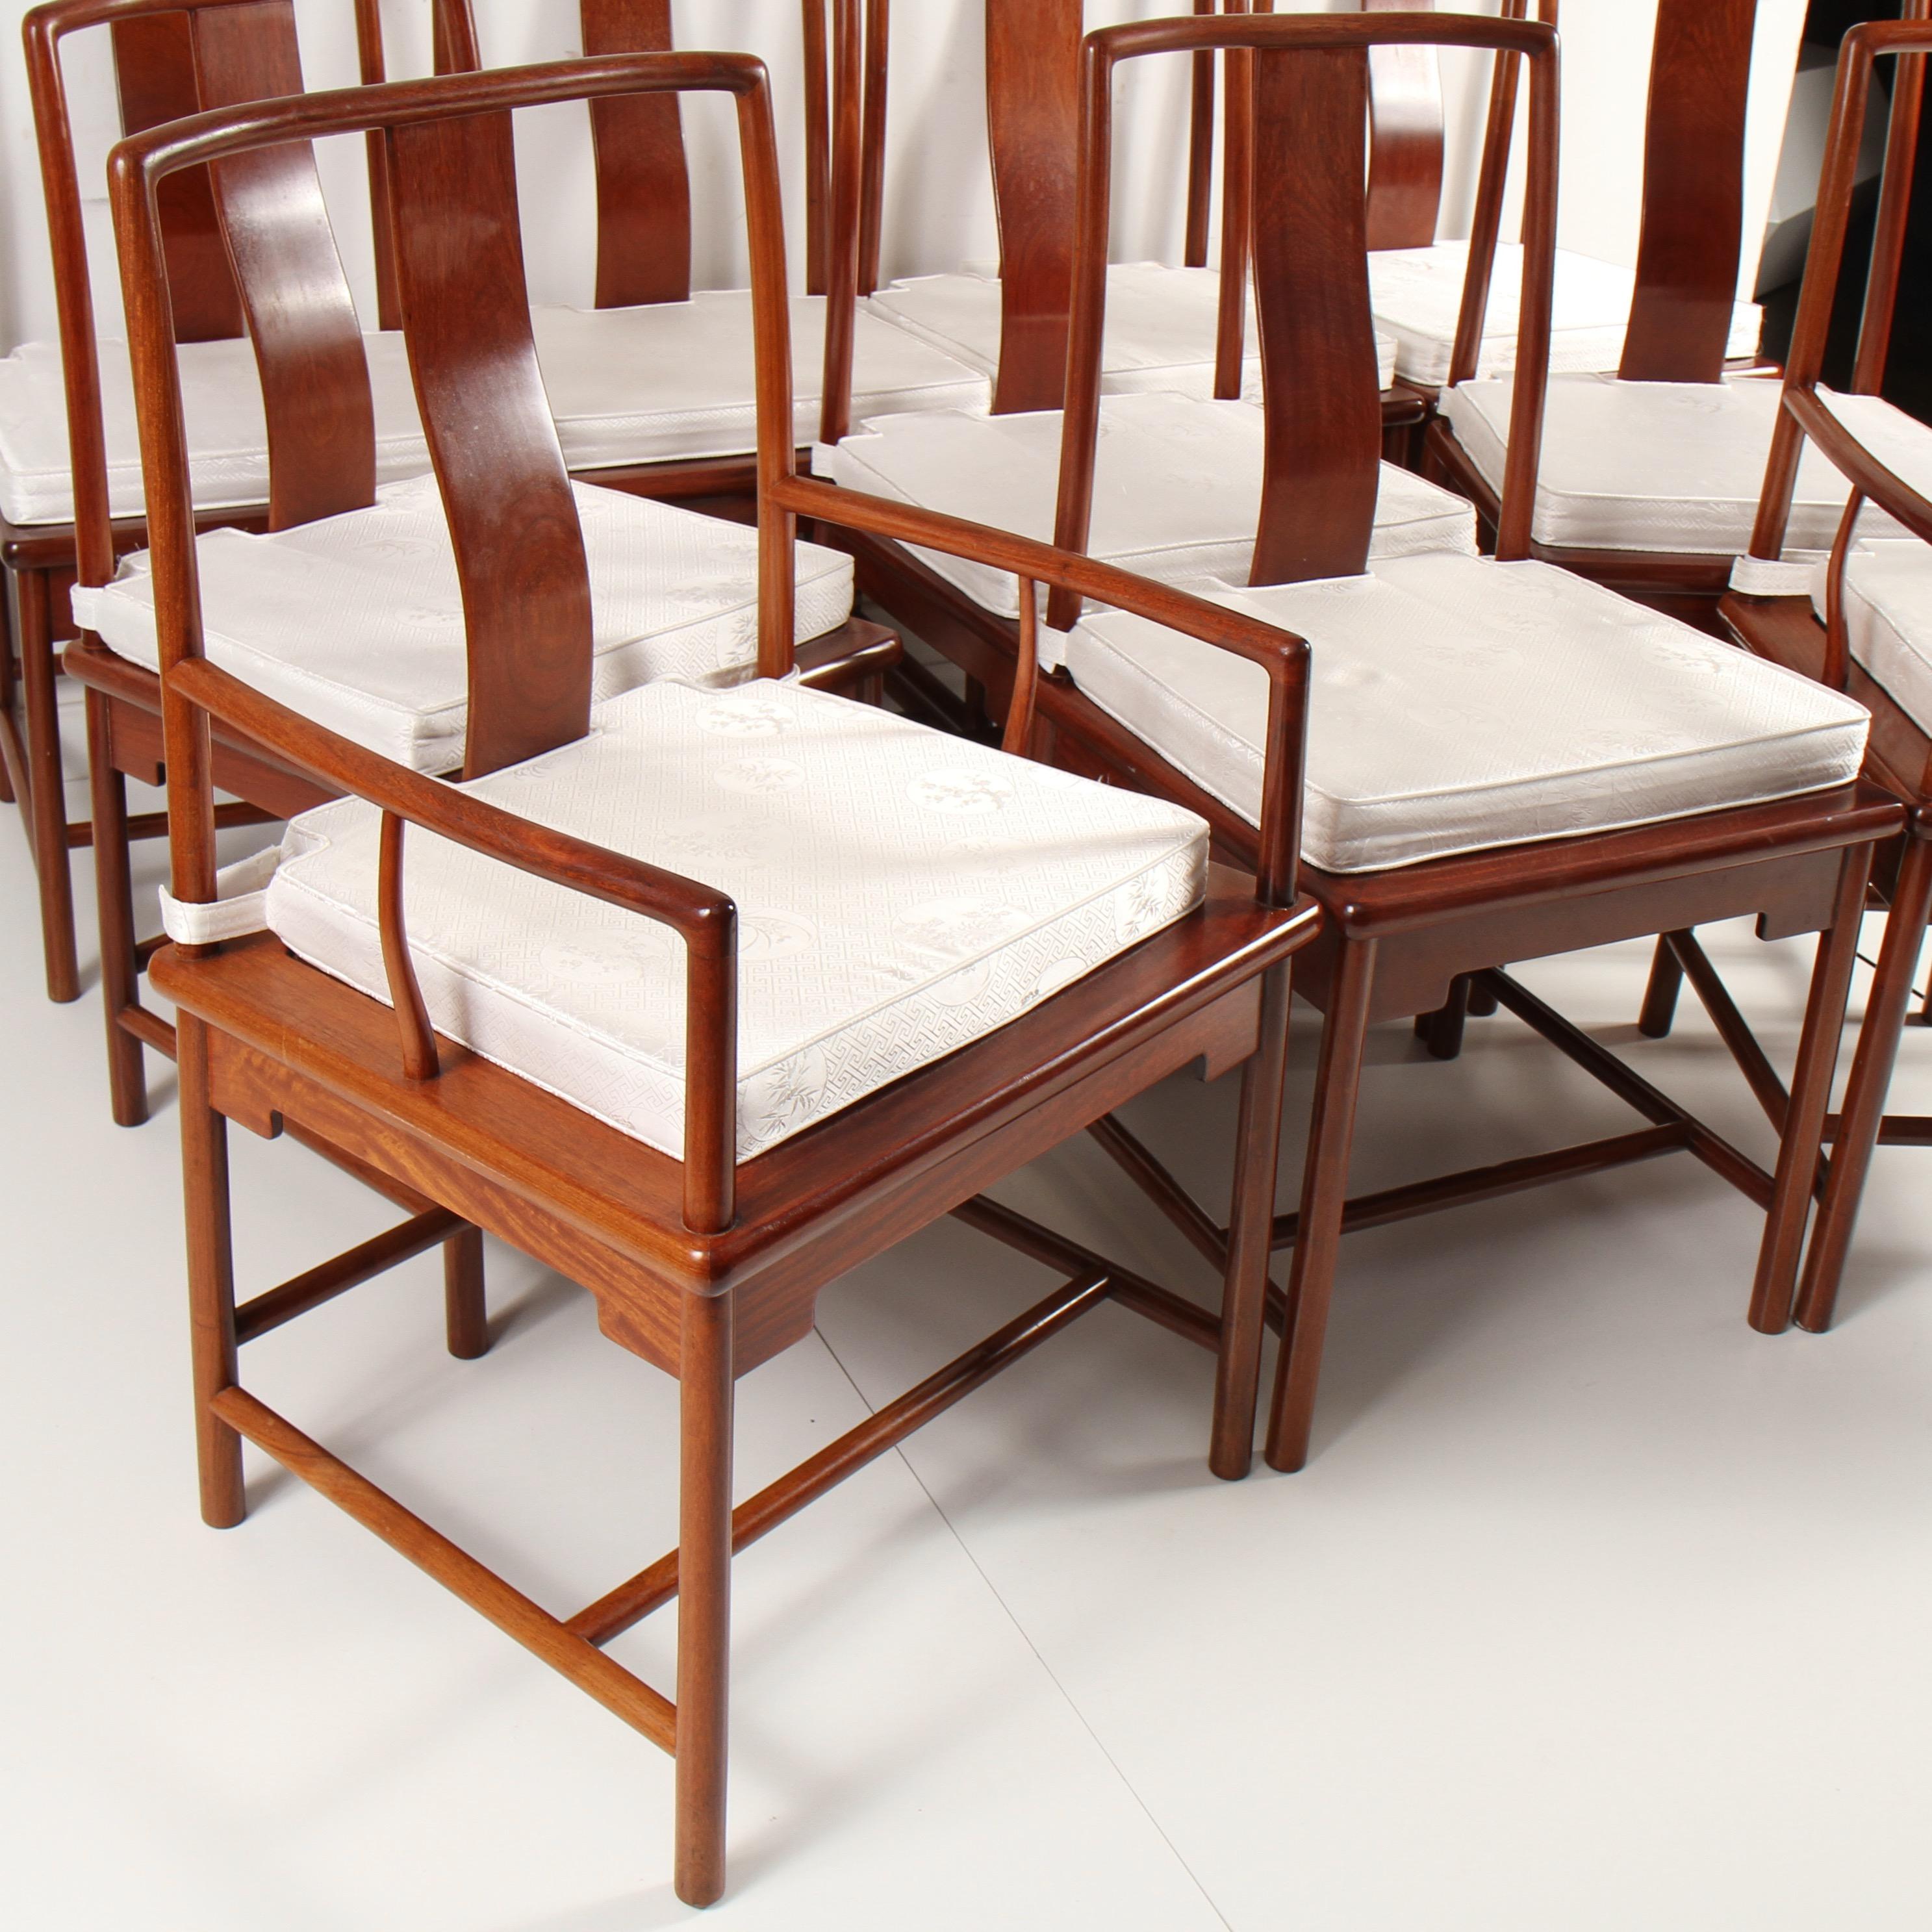 Fabulous Chinese rosewood dining chairs. An exceptional set of 10 chairs, 8 side chairs and 2 armchairs. All created out of solid rosewood in the Ming style. Set is in very good condition with minimal wear. Custom made seat cushions are in great